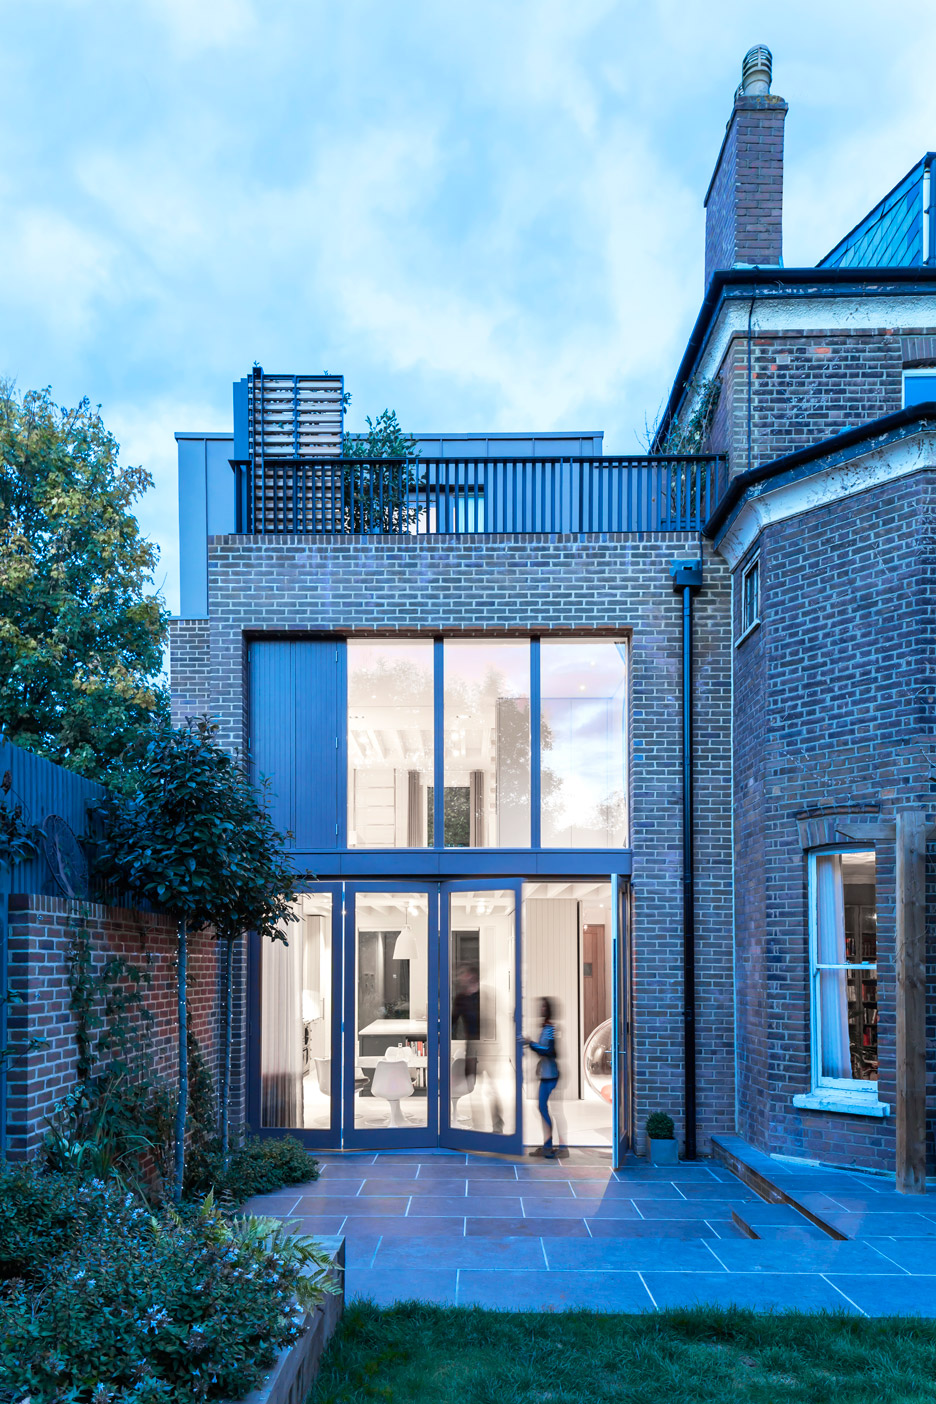 House extension on Coolhurst Road by Alexander Martin Architects